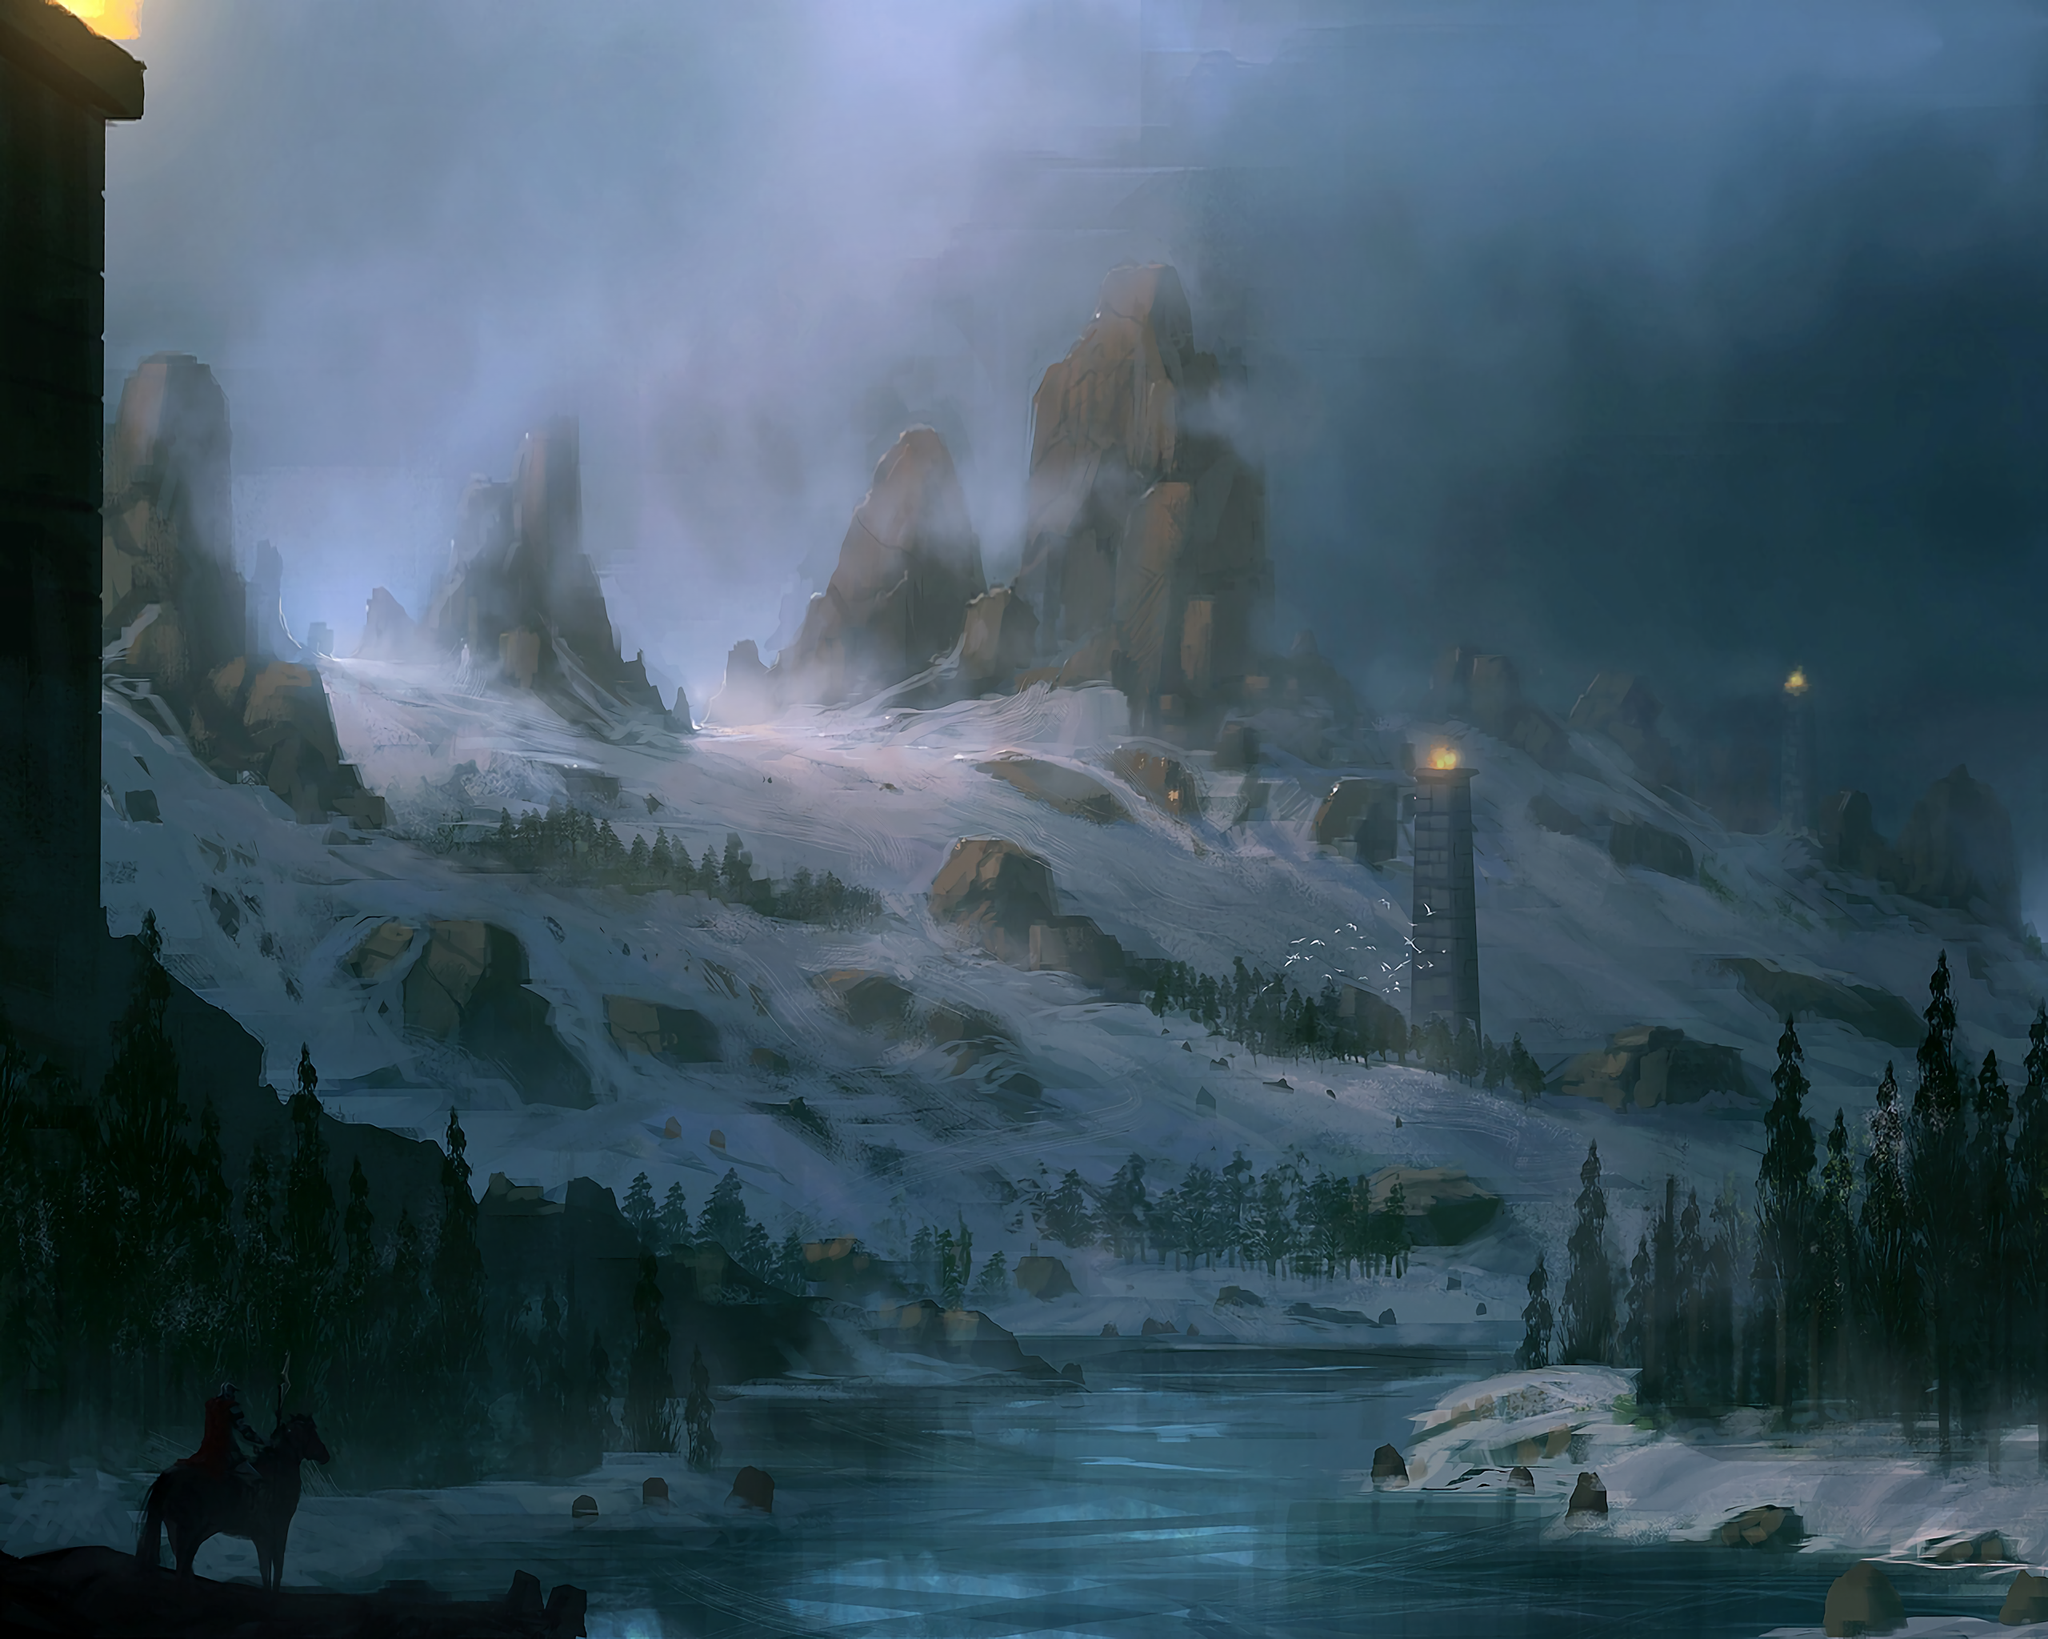 "Winter Is Coming" is the first episode of the HBO medieval fantasy. by Jorge Jacinto